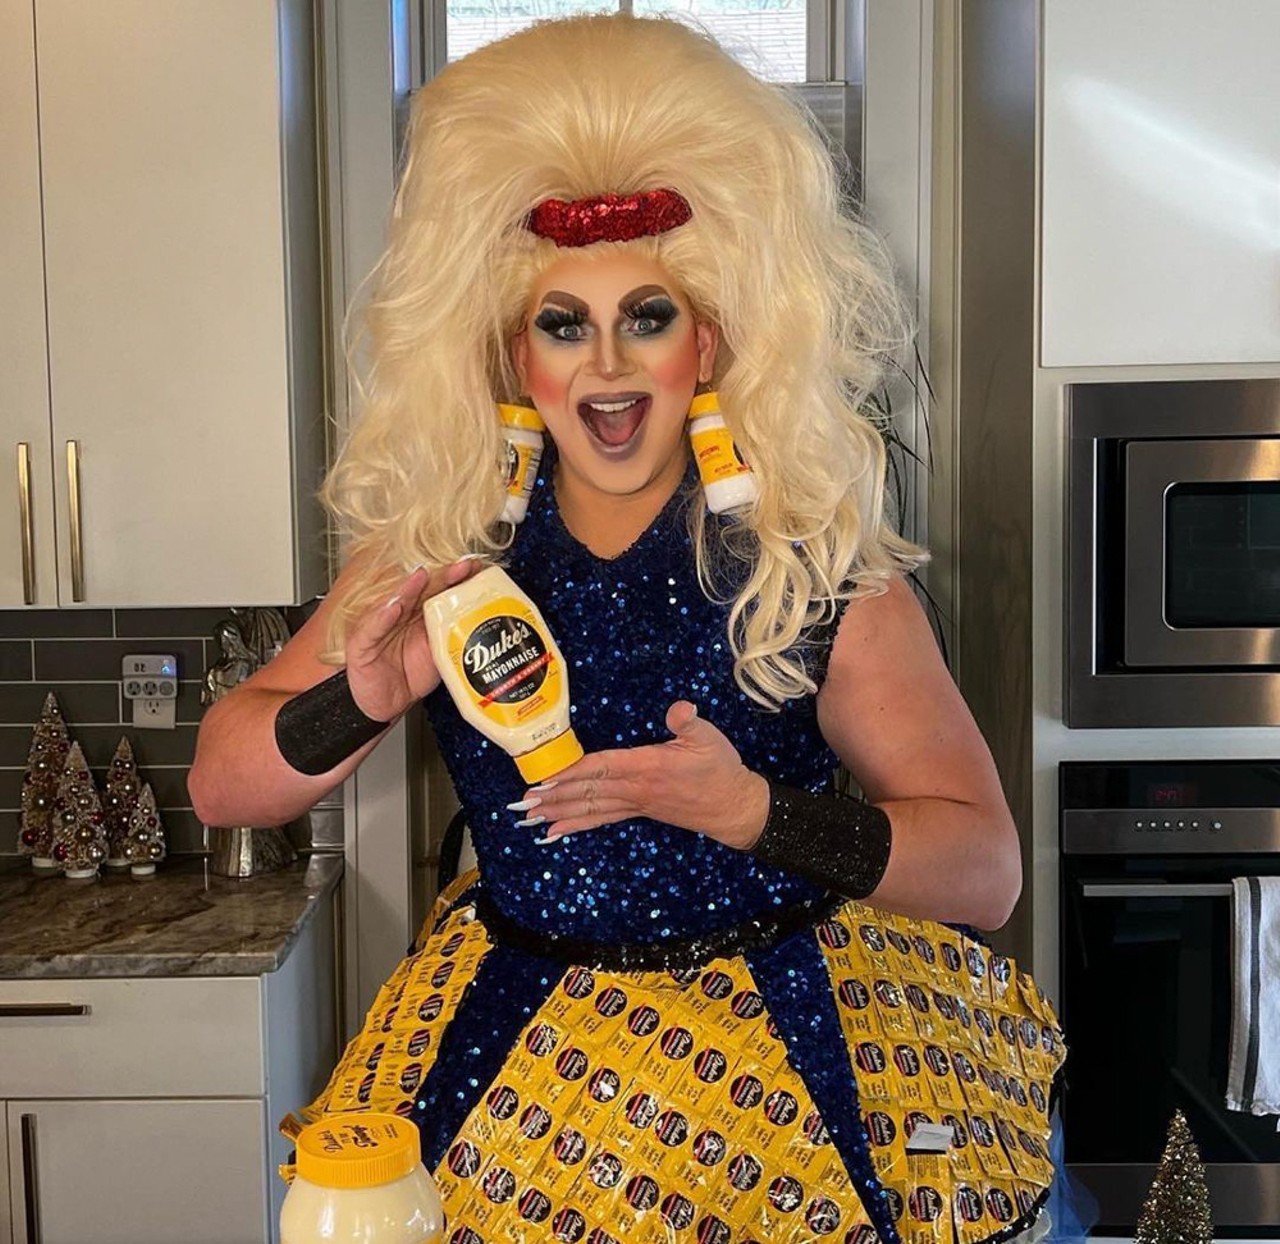  May O&#146;Nays
@themayonays  
Very fittingly for a queen with a food name, May O&#146;Nays loves to cook &#151; and she even teaches cooking (and gardening) classes in Louisville! 
Photo via themayonays/Instagram